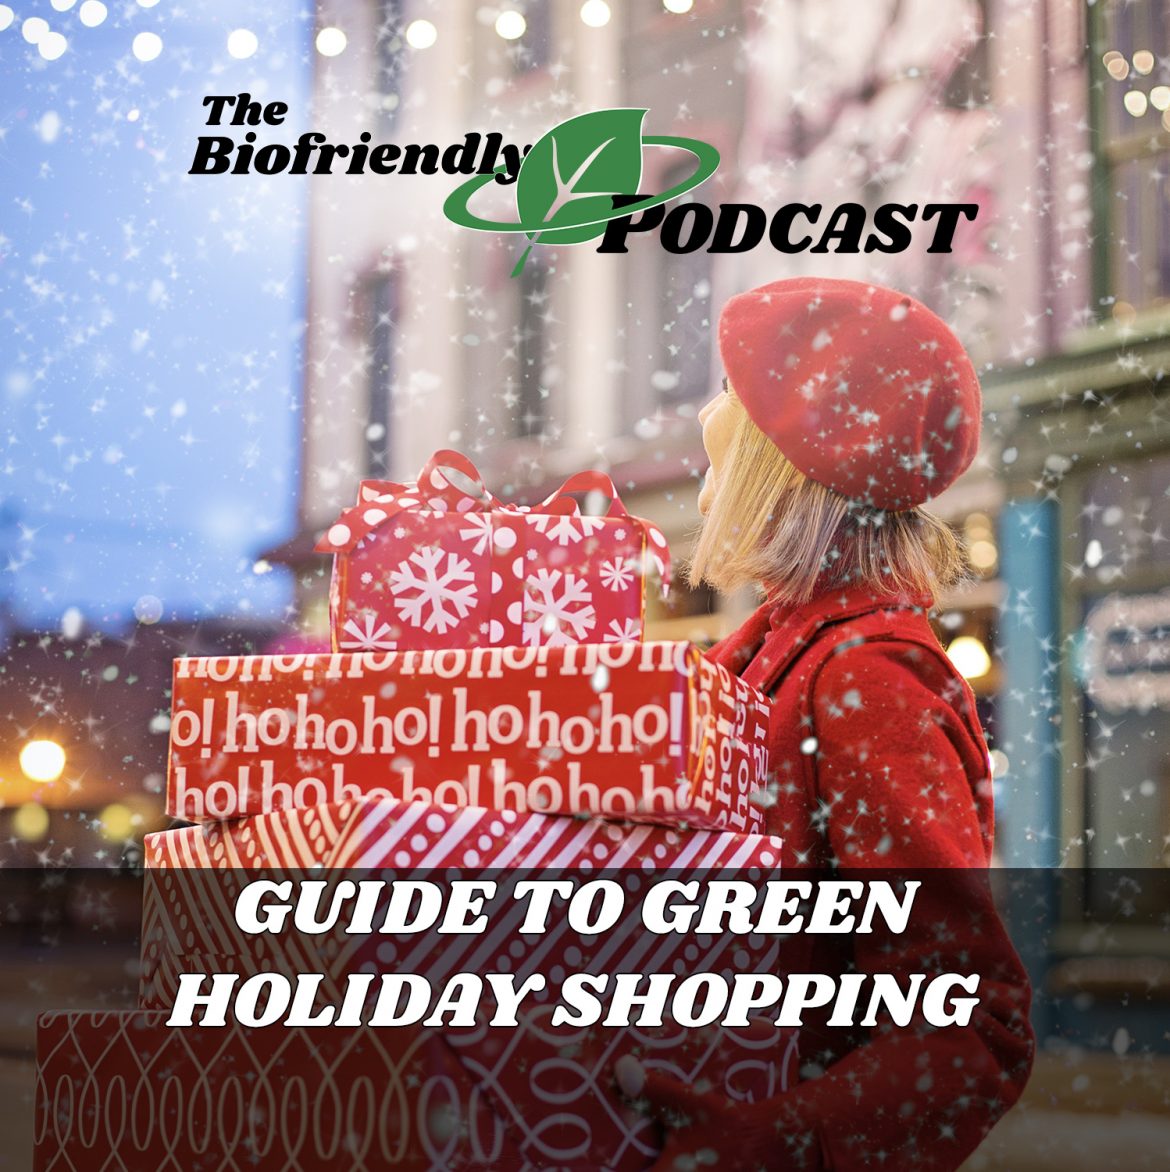 Guide to Green Holiday Shopping